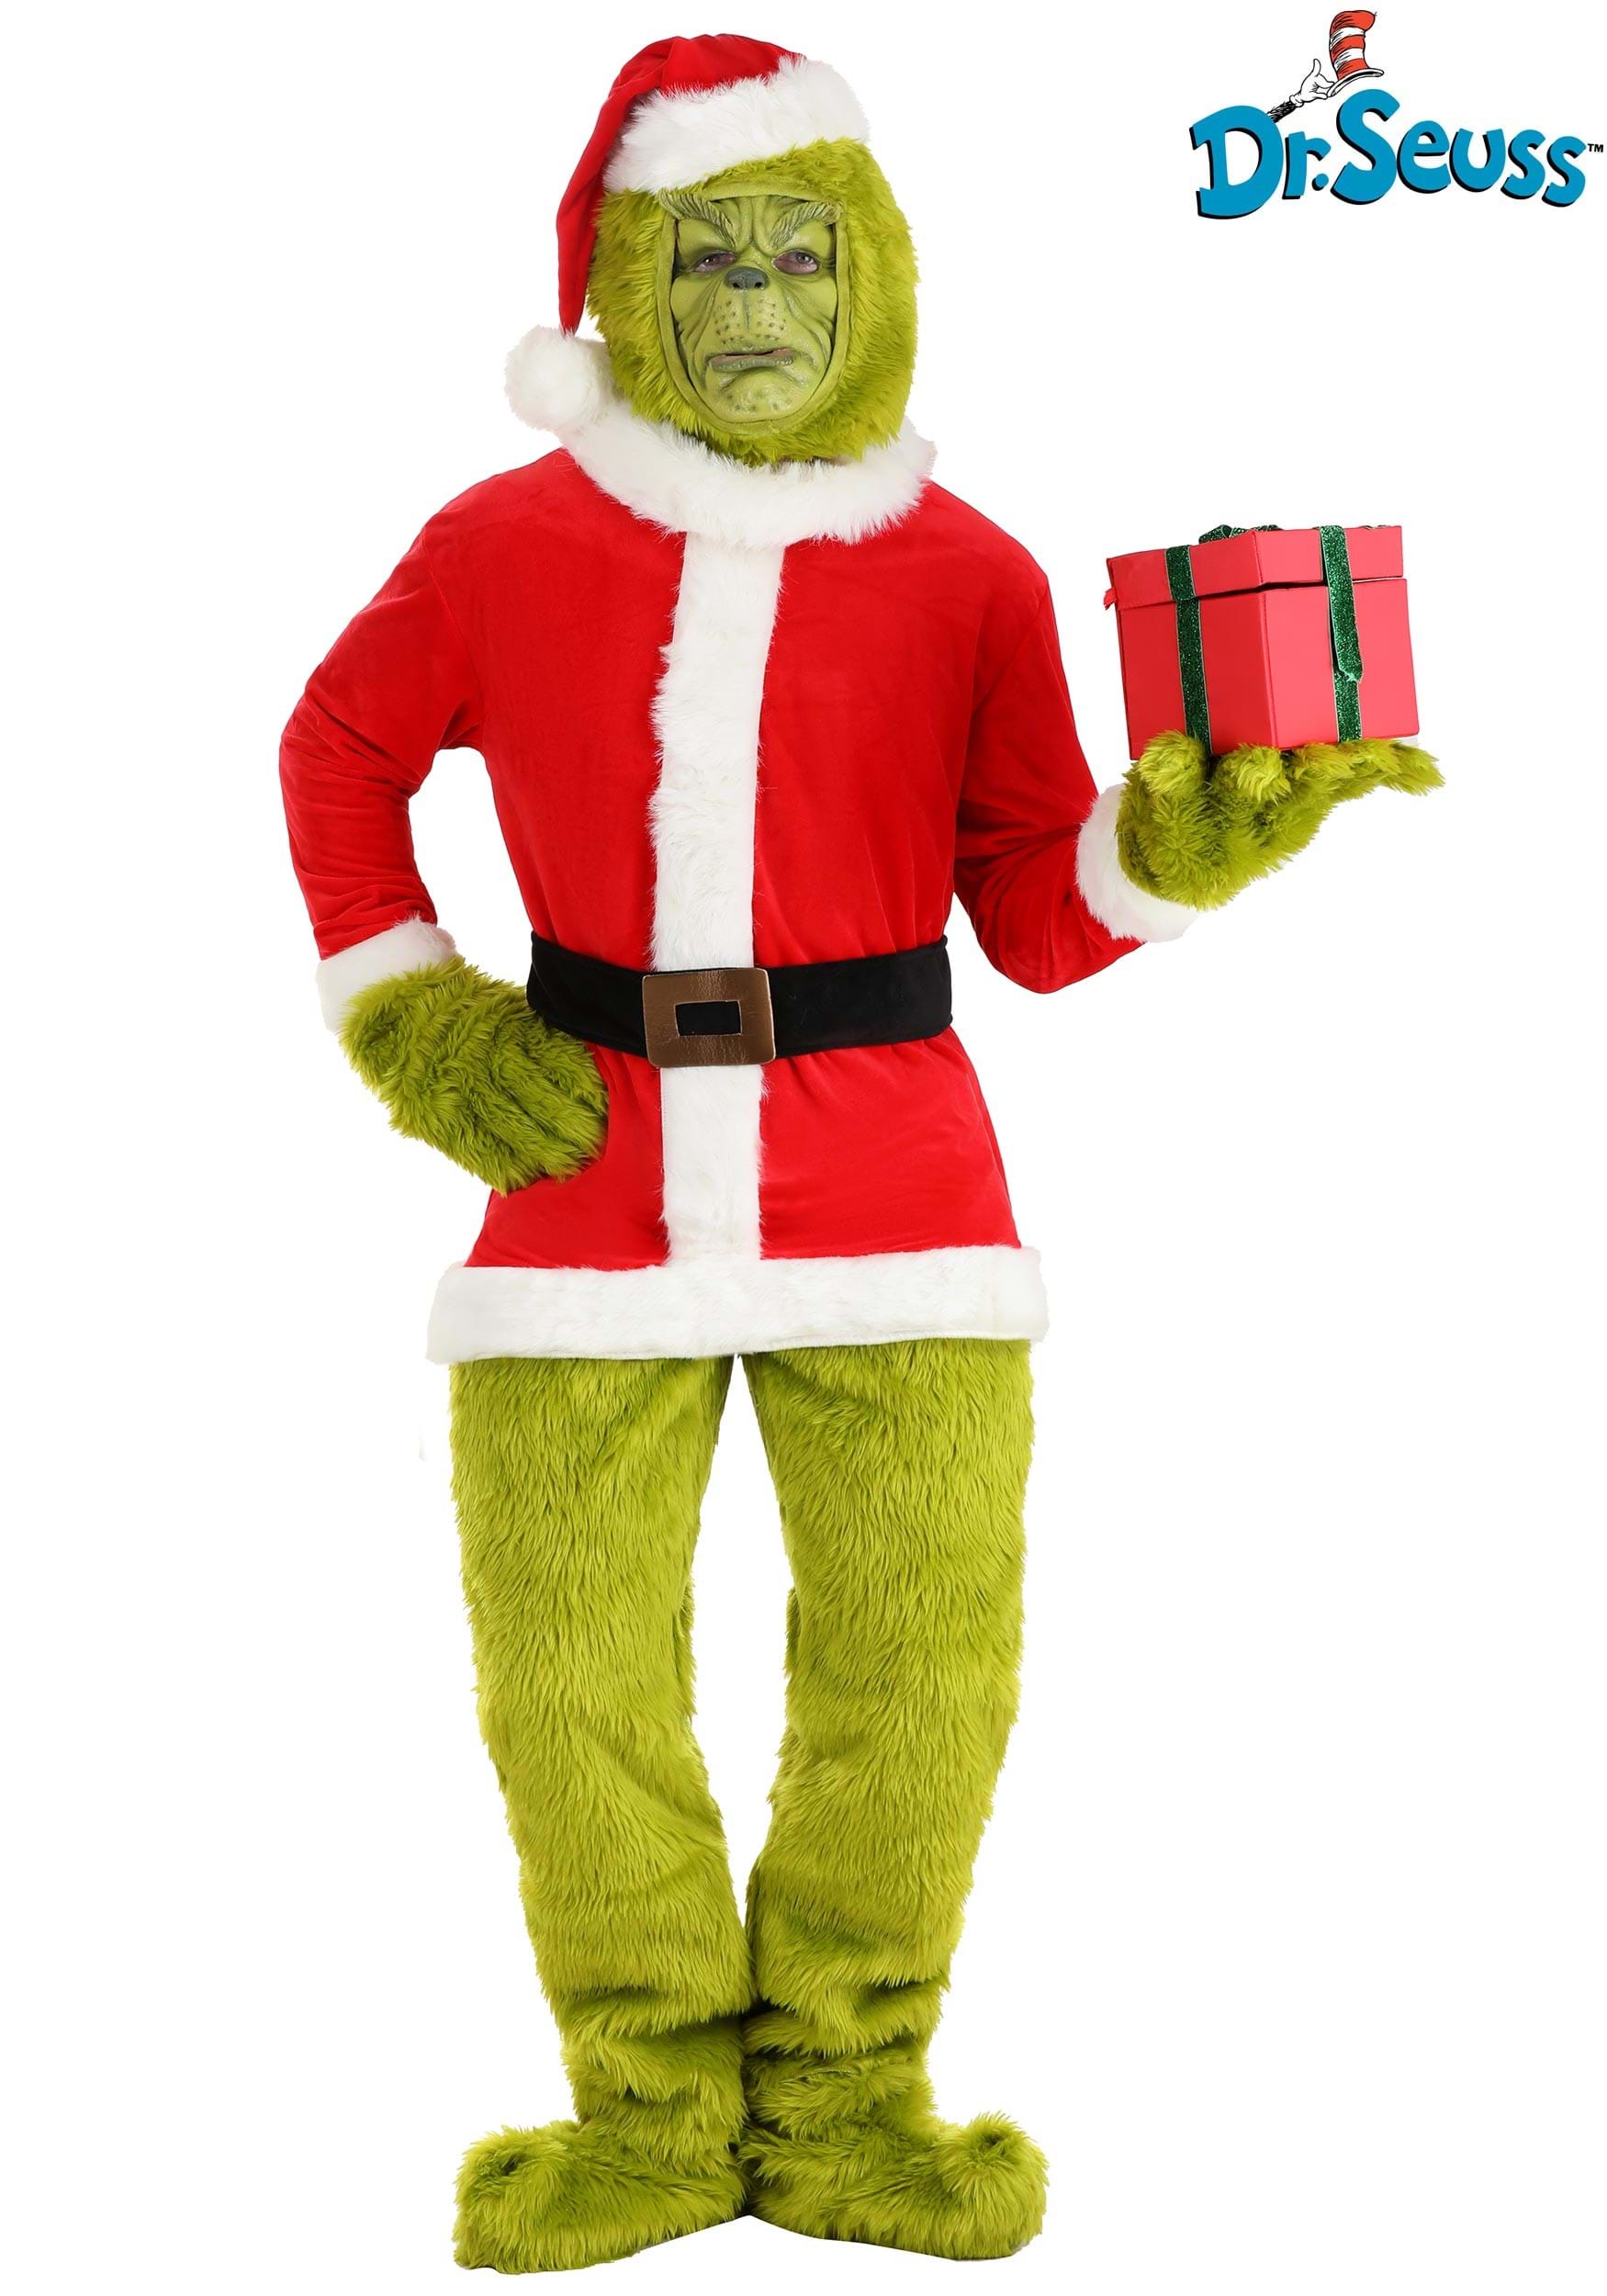 https://images.halloween.com/products/75749/1-1/the-grinch-adult-santa-open-face-costume.jpg